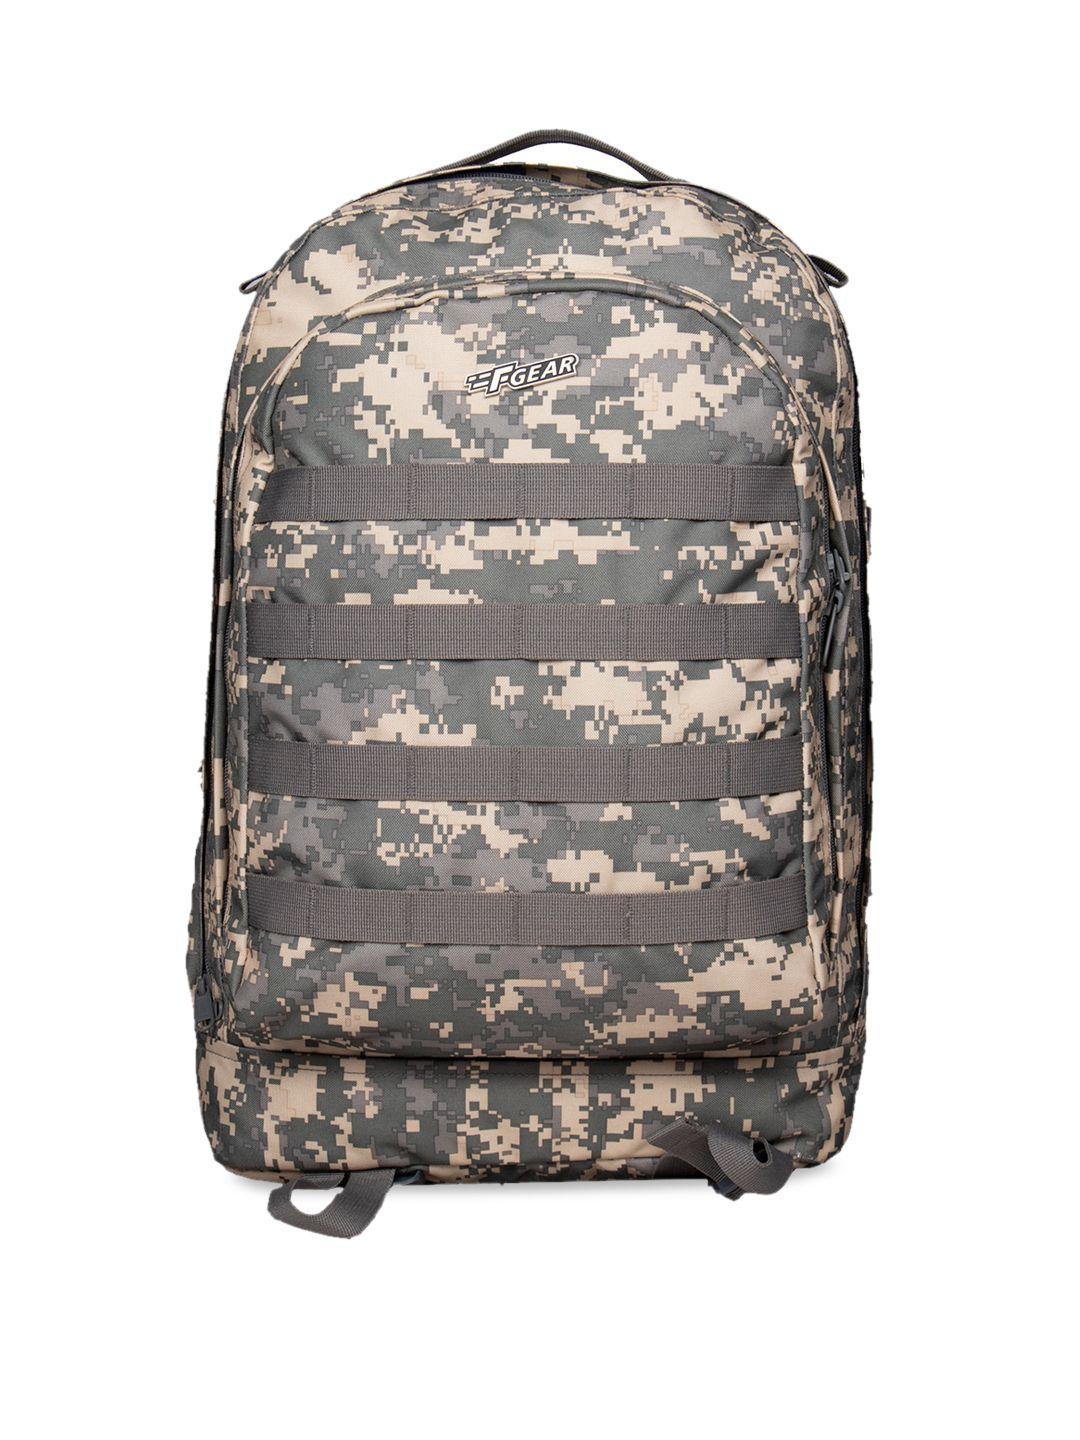 f gear unisex grey & brown camouflage backpack